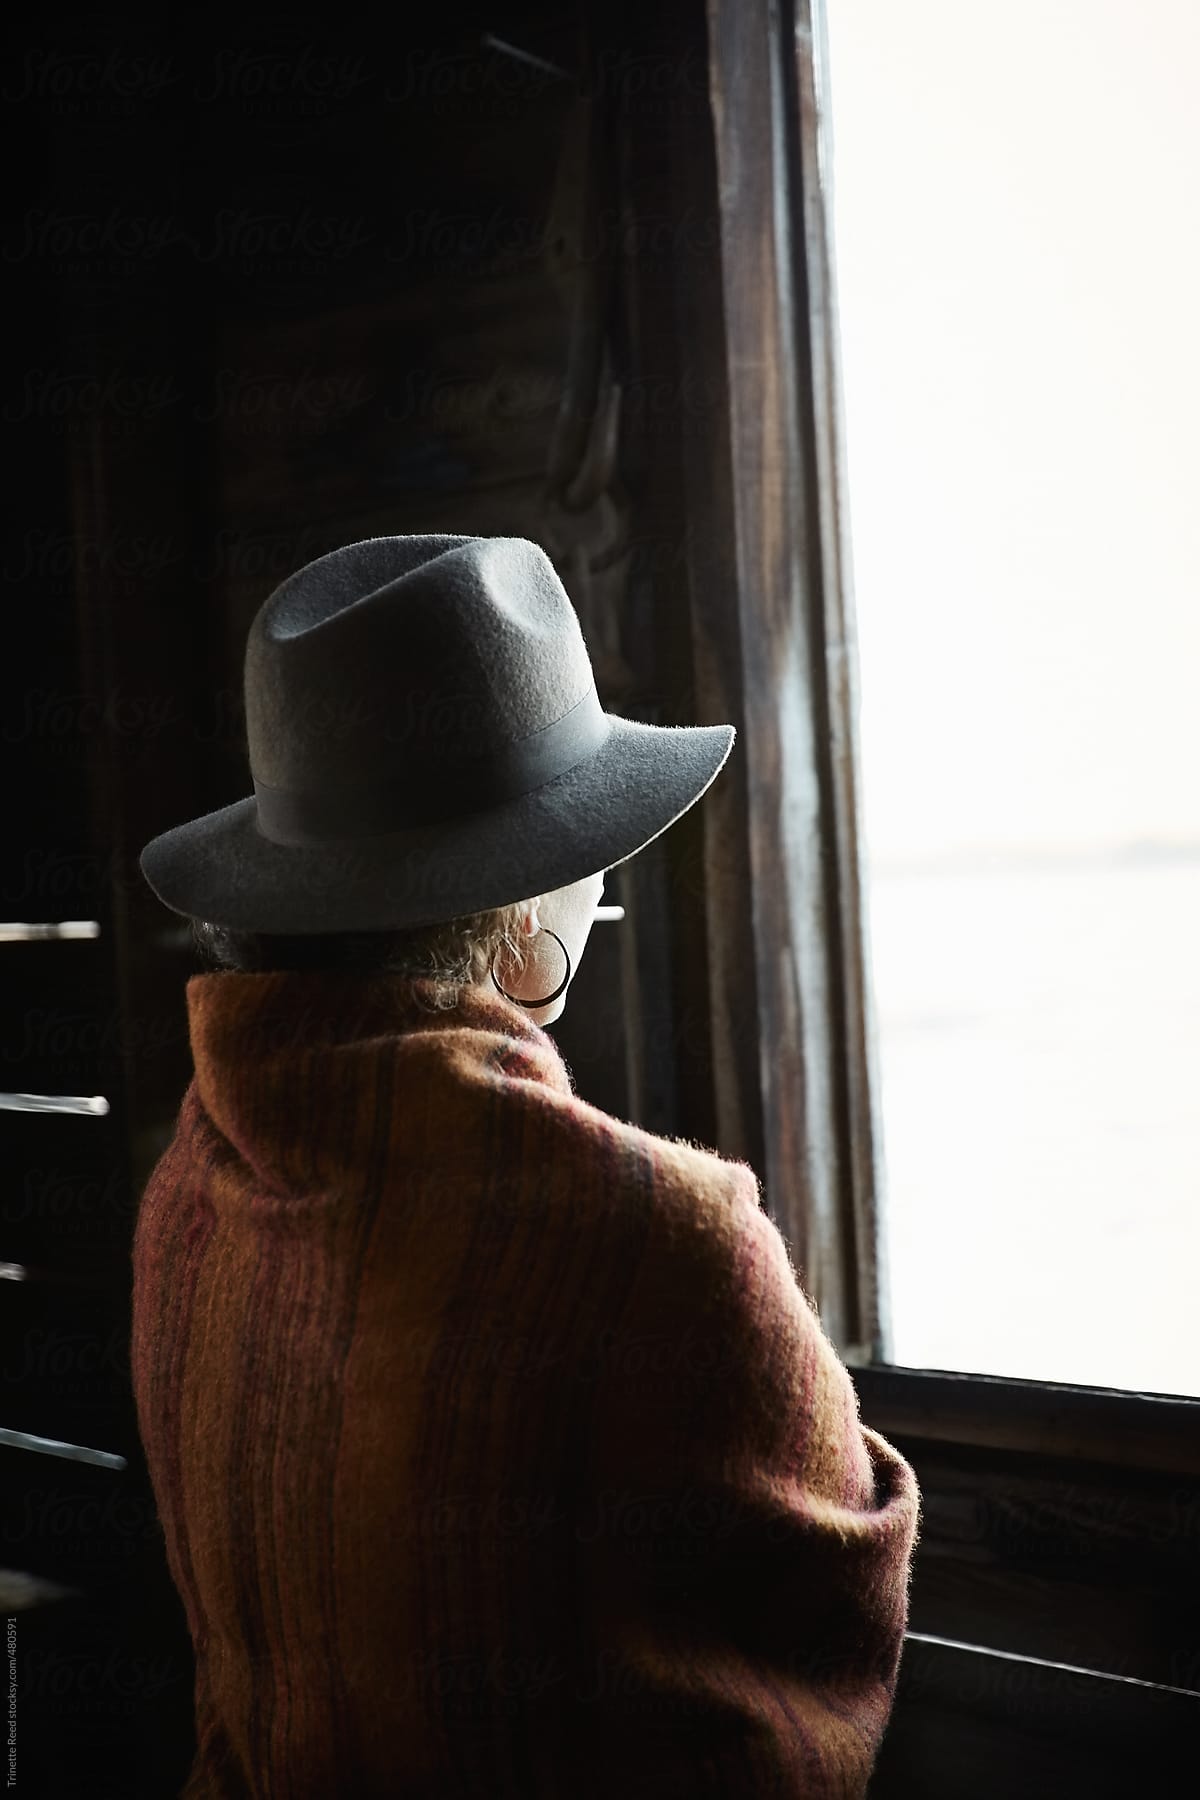 Woman looking out window with hat on